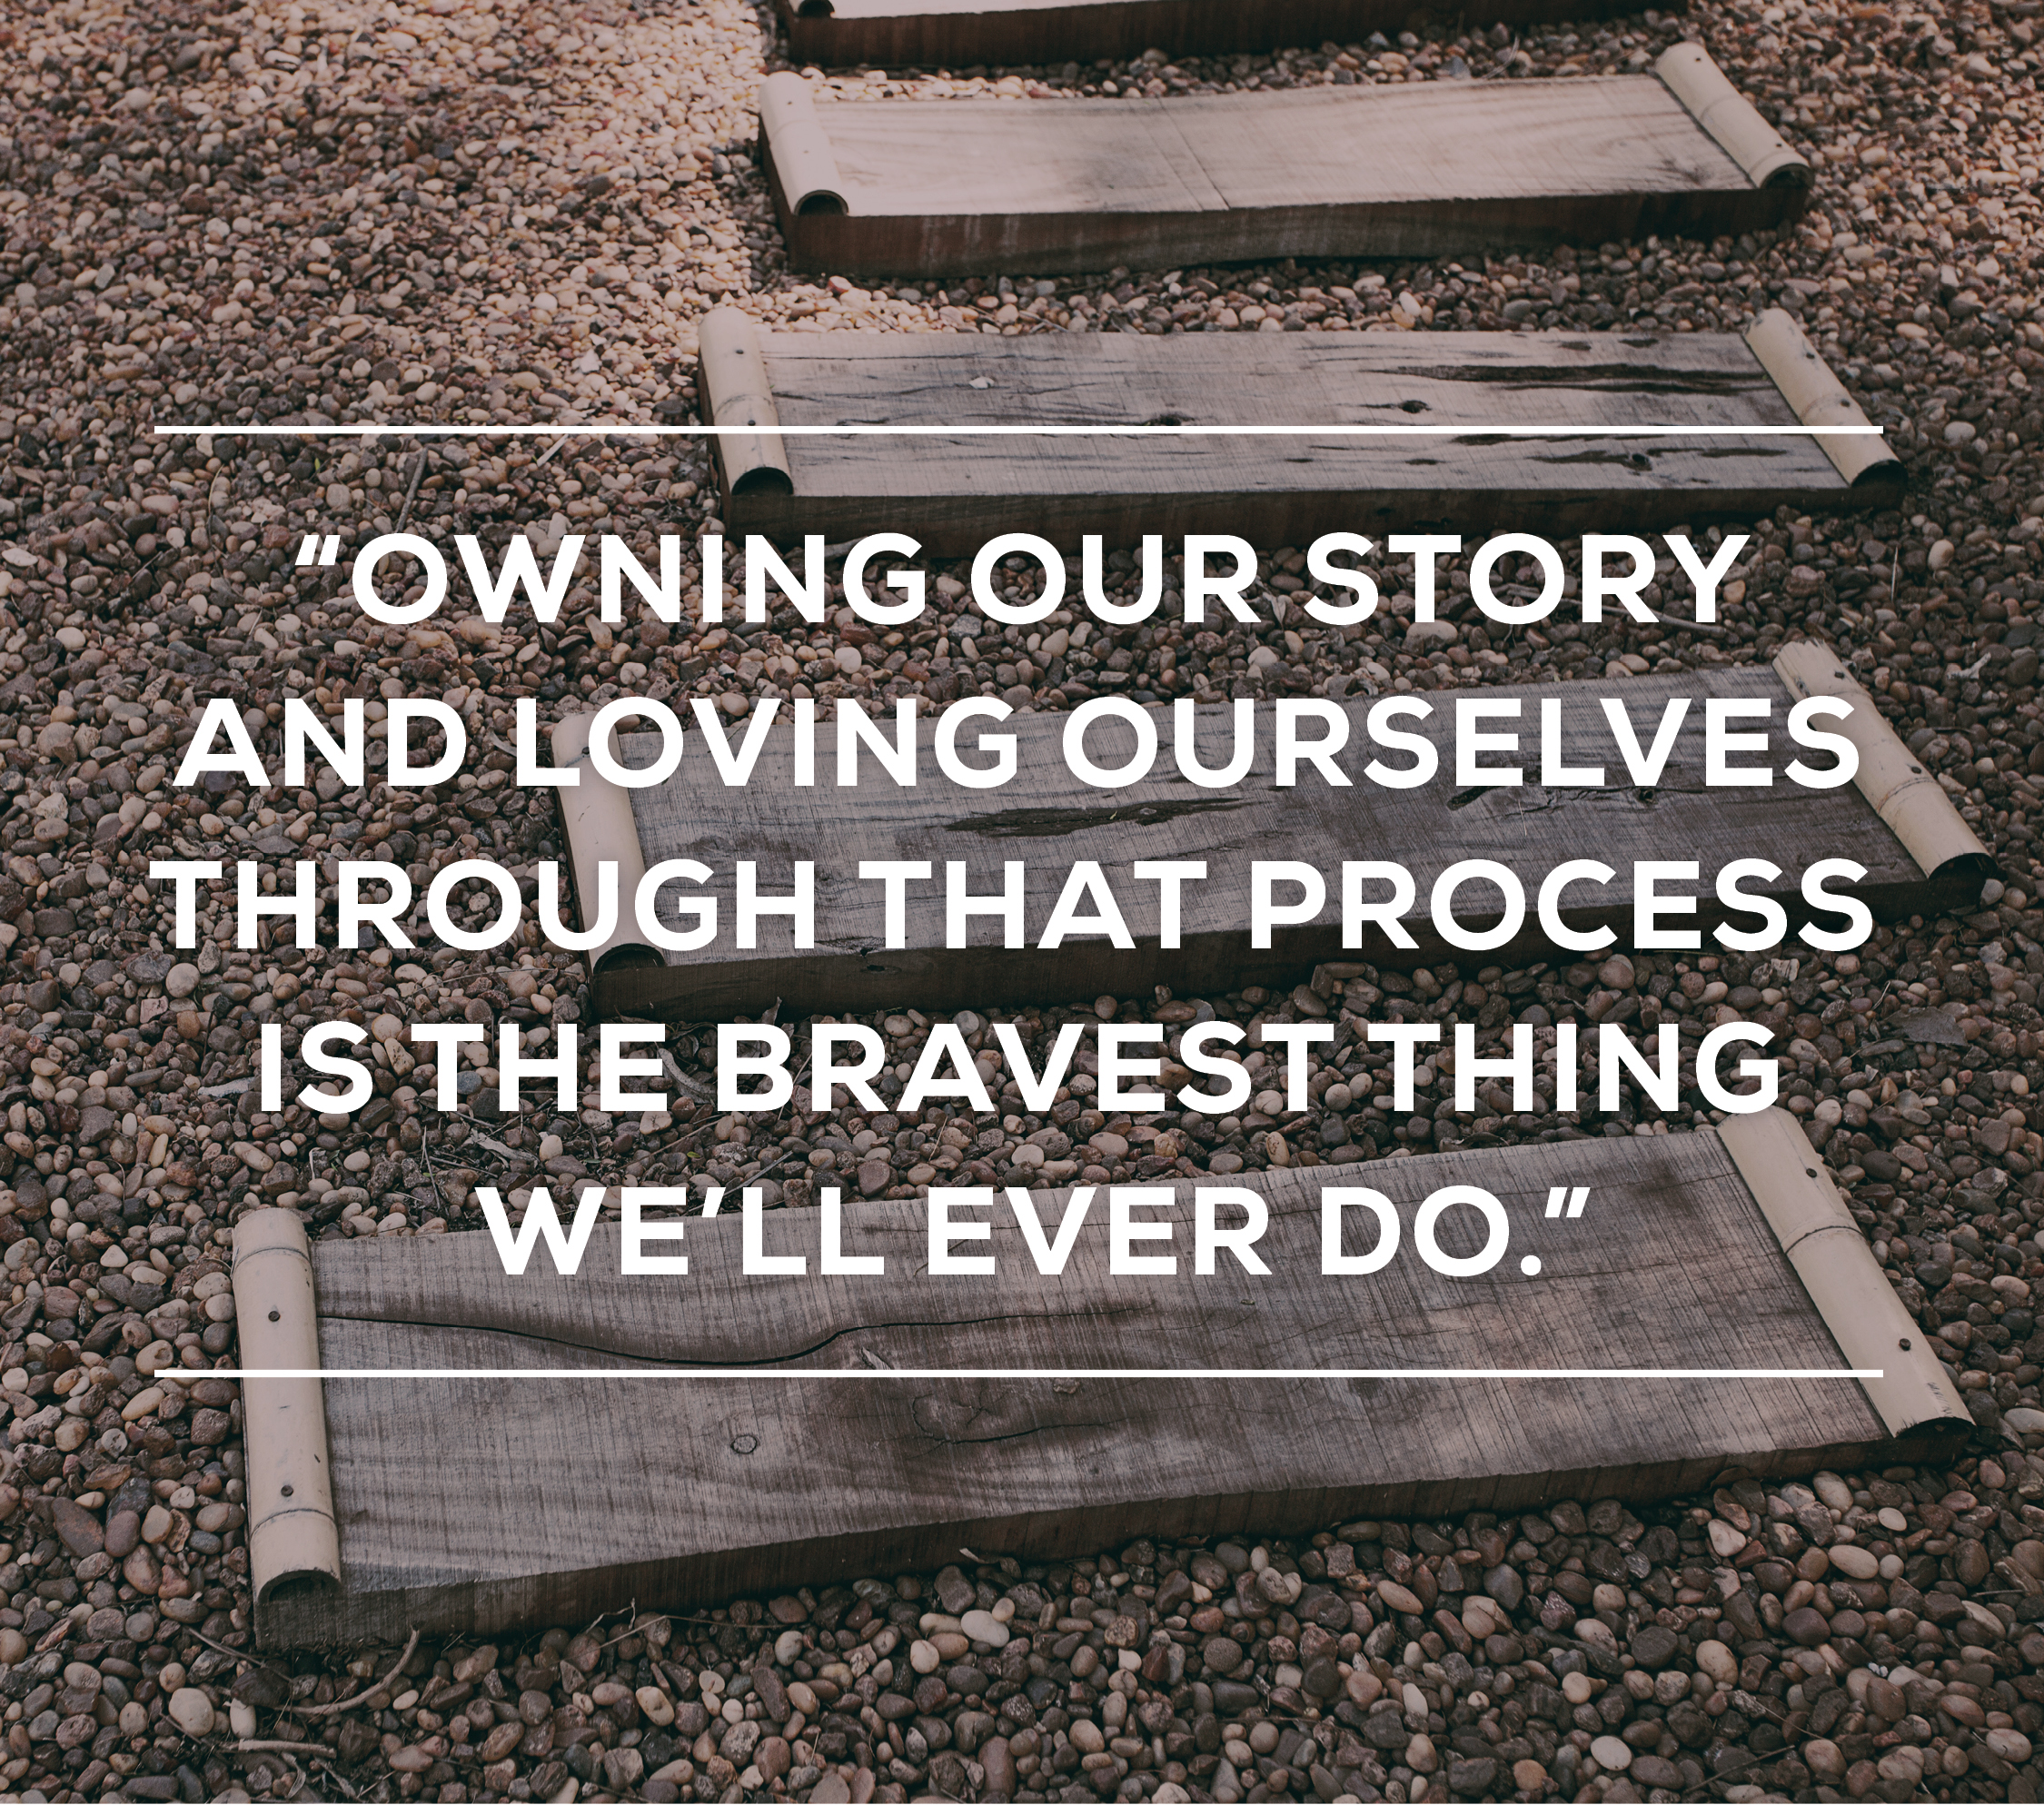 Owning our story and loving ourselves through that process is the bravest thing we will ever do.  Quote by Brene Brown, The Daring Way ™ 